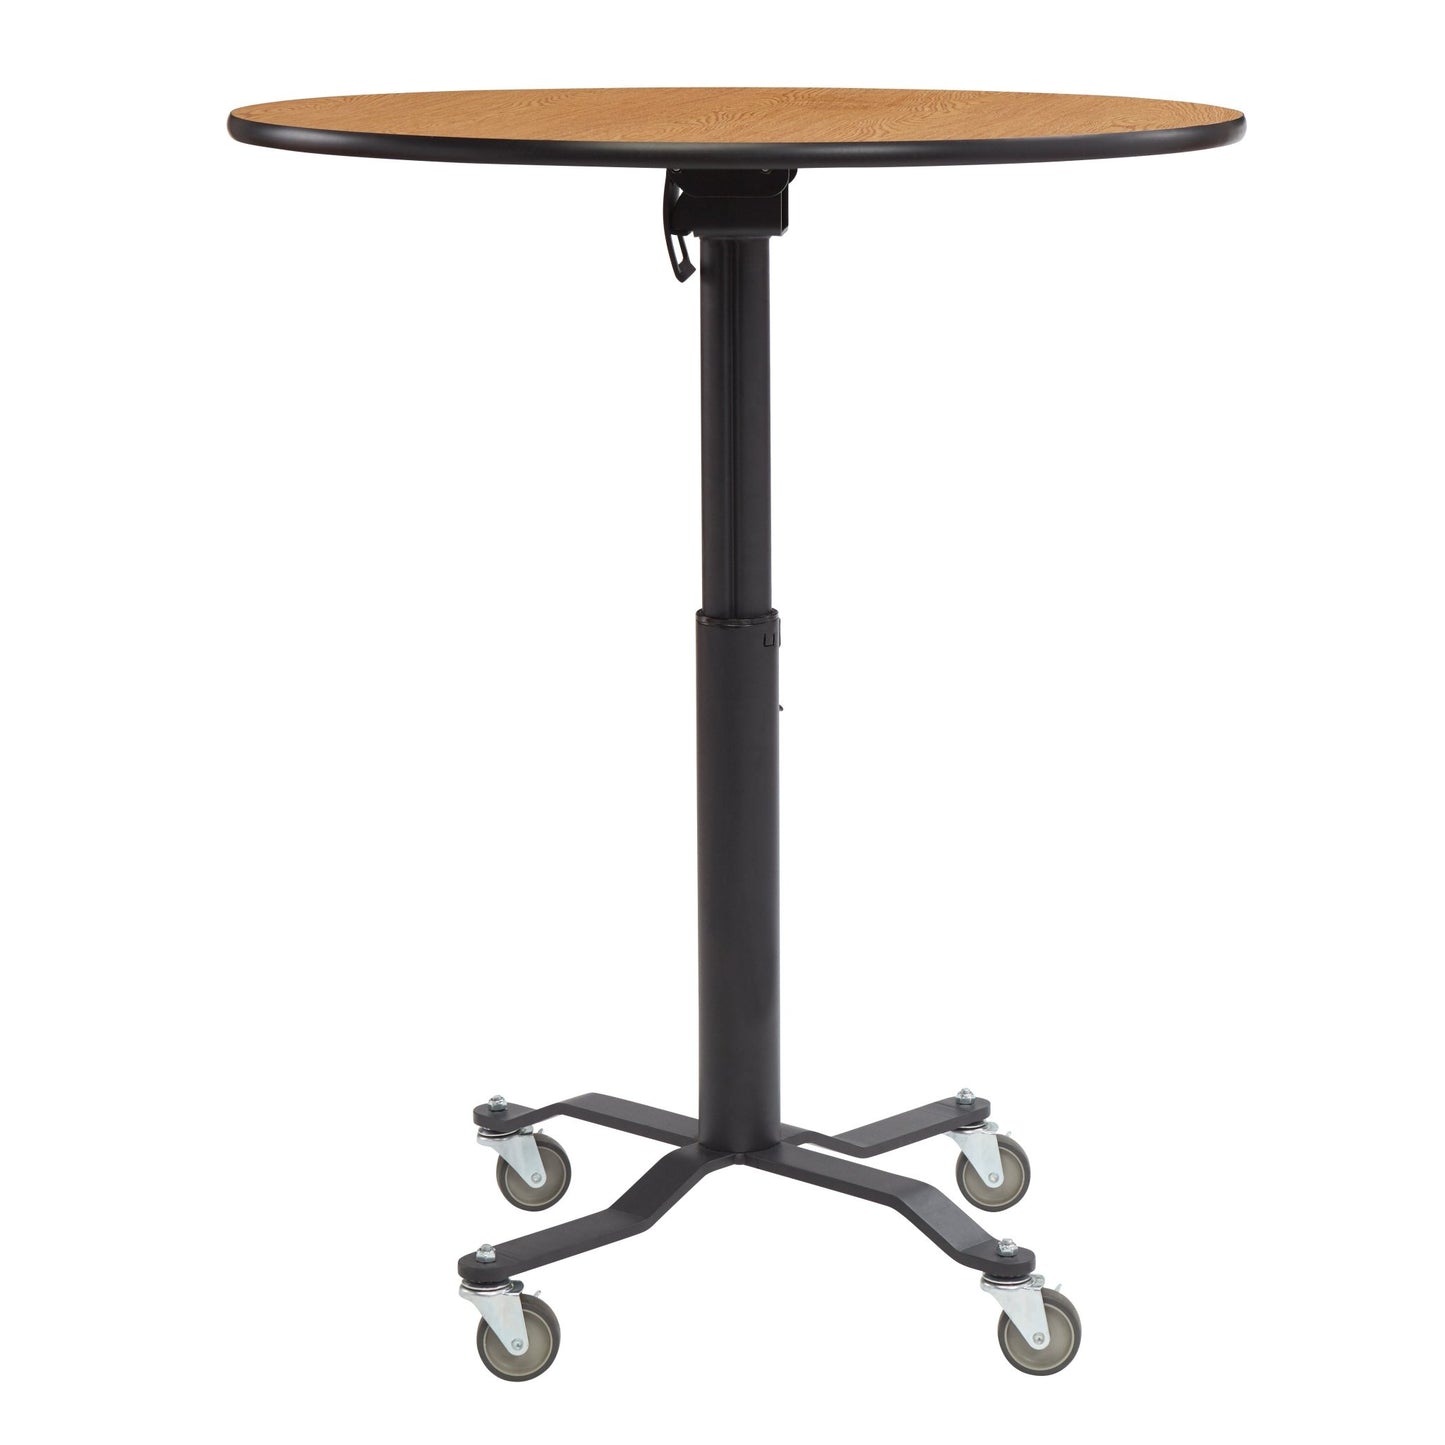 NPS Cafe Time II Table, 36" Round, High Pressure Laminate Top, Particle Board, Vinyl T-Molding (NationalPublic Seating NPS-PCT136PBTM) - SchoolOutlet